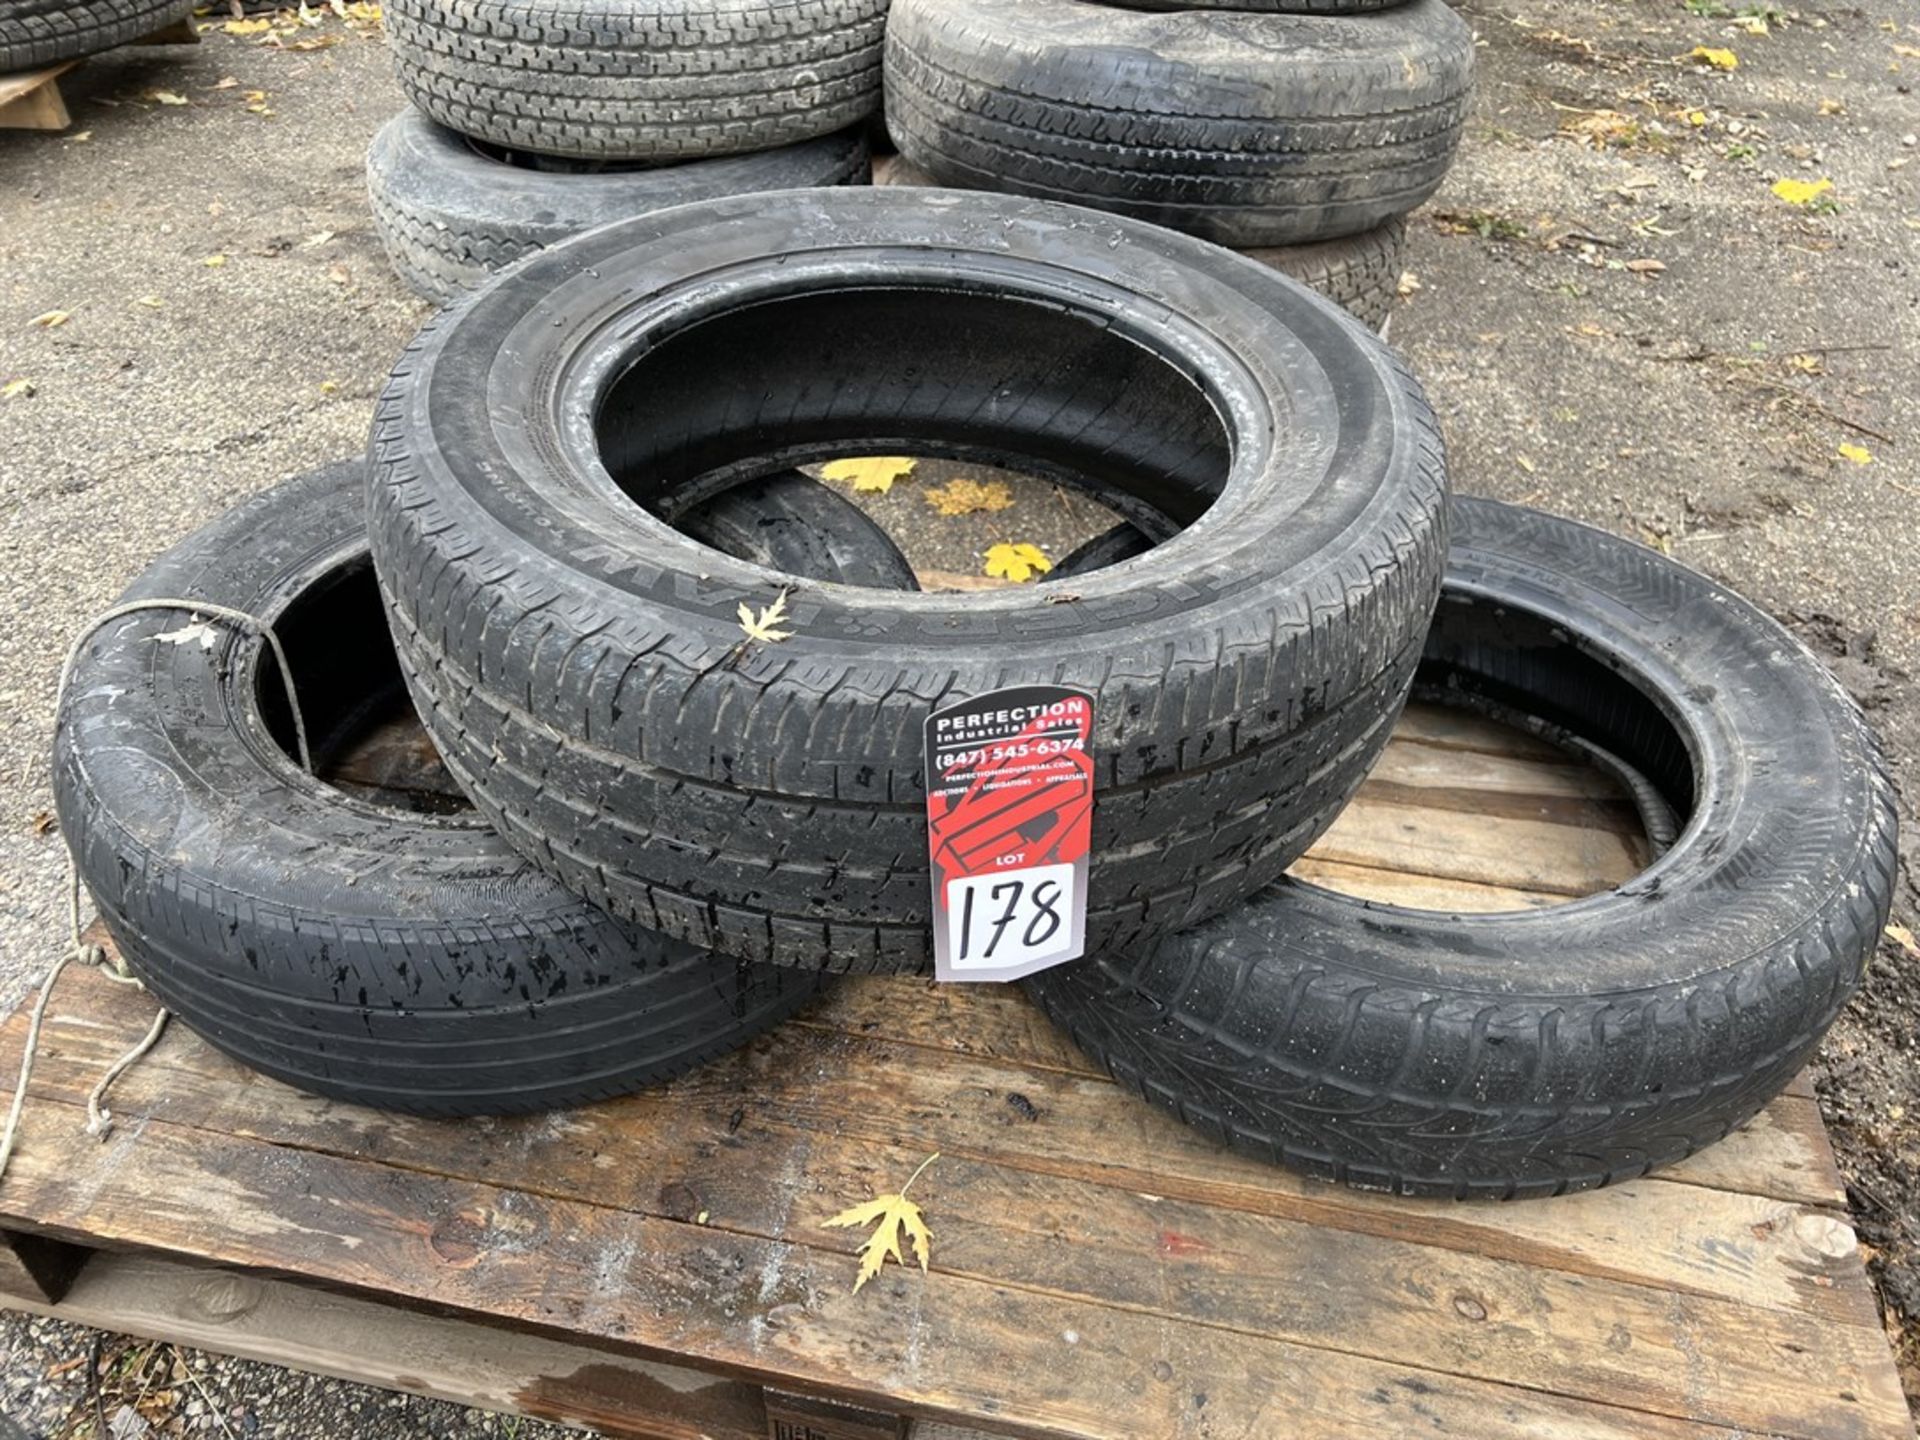 Lot Comprising (3) Tires, (1) 215/65R16 98T, (1) 195/65R15, and (1) 195/70R1491H Tubeless